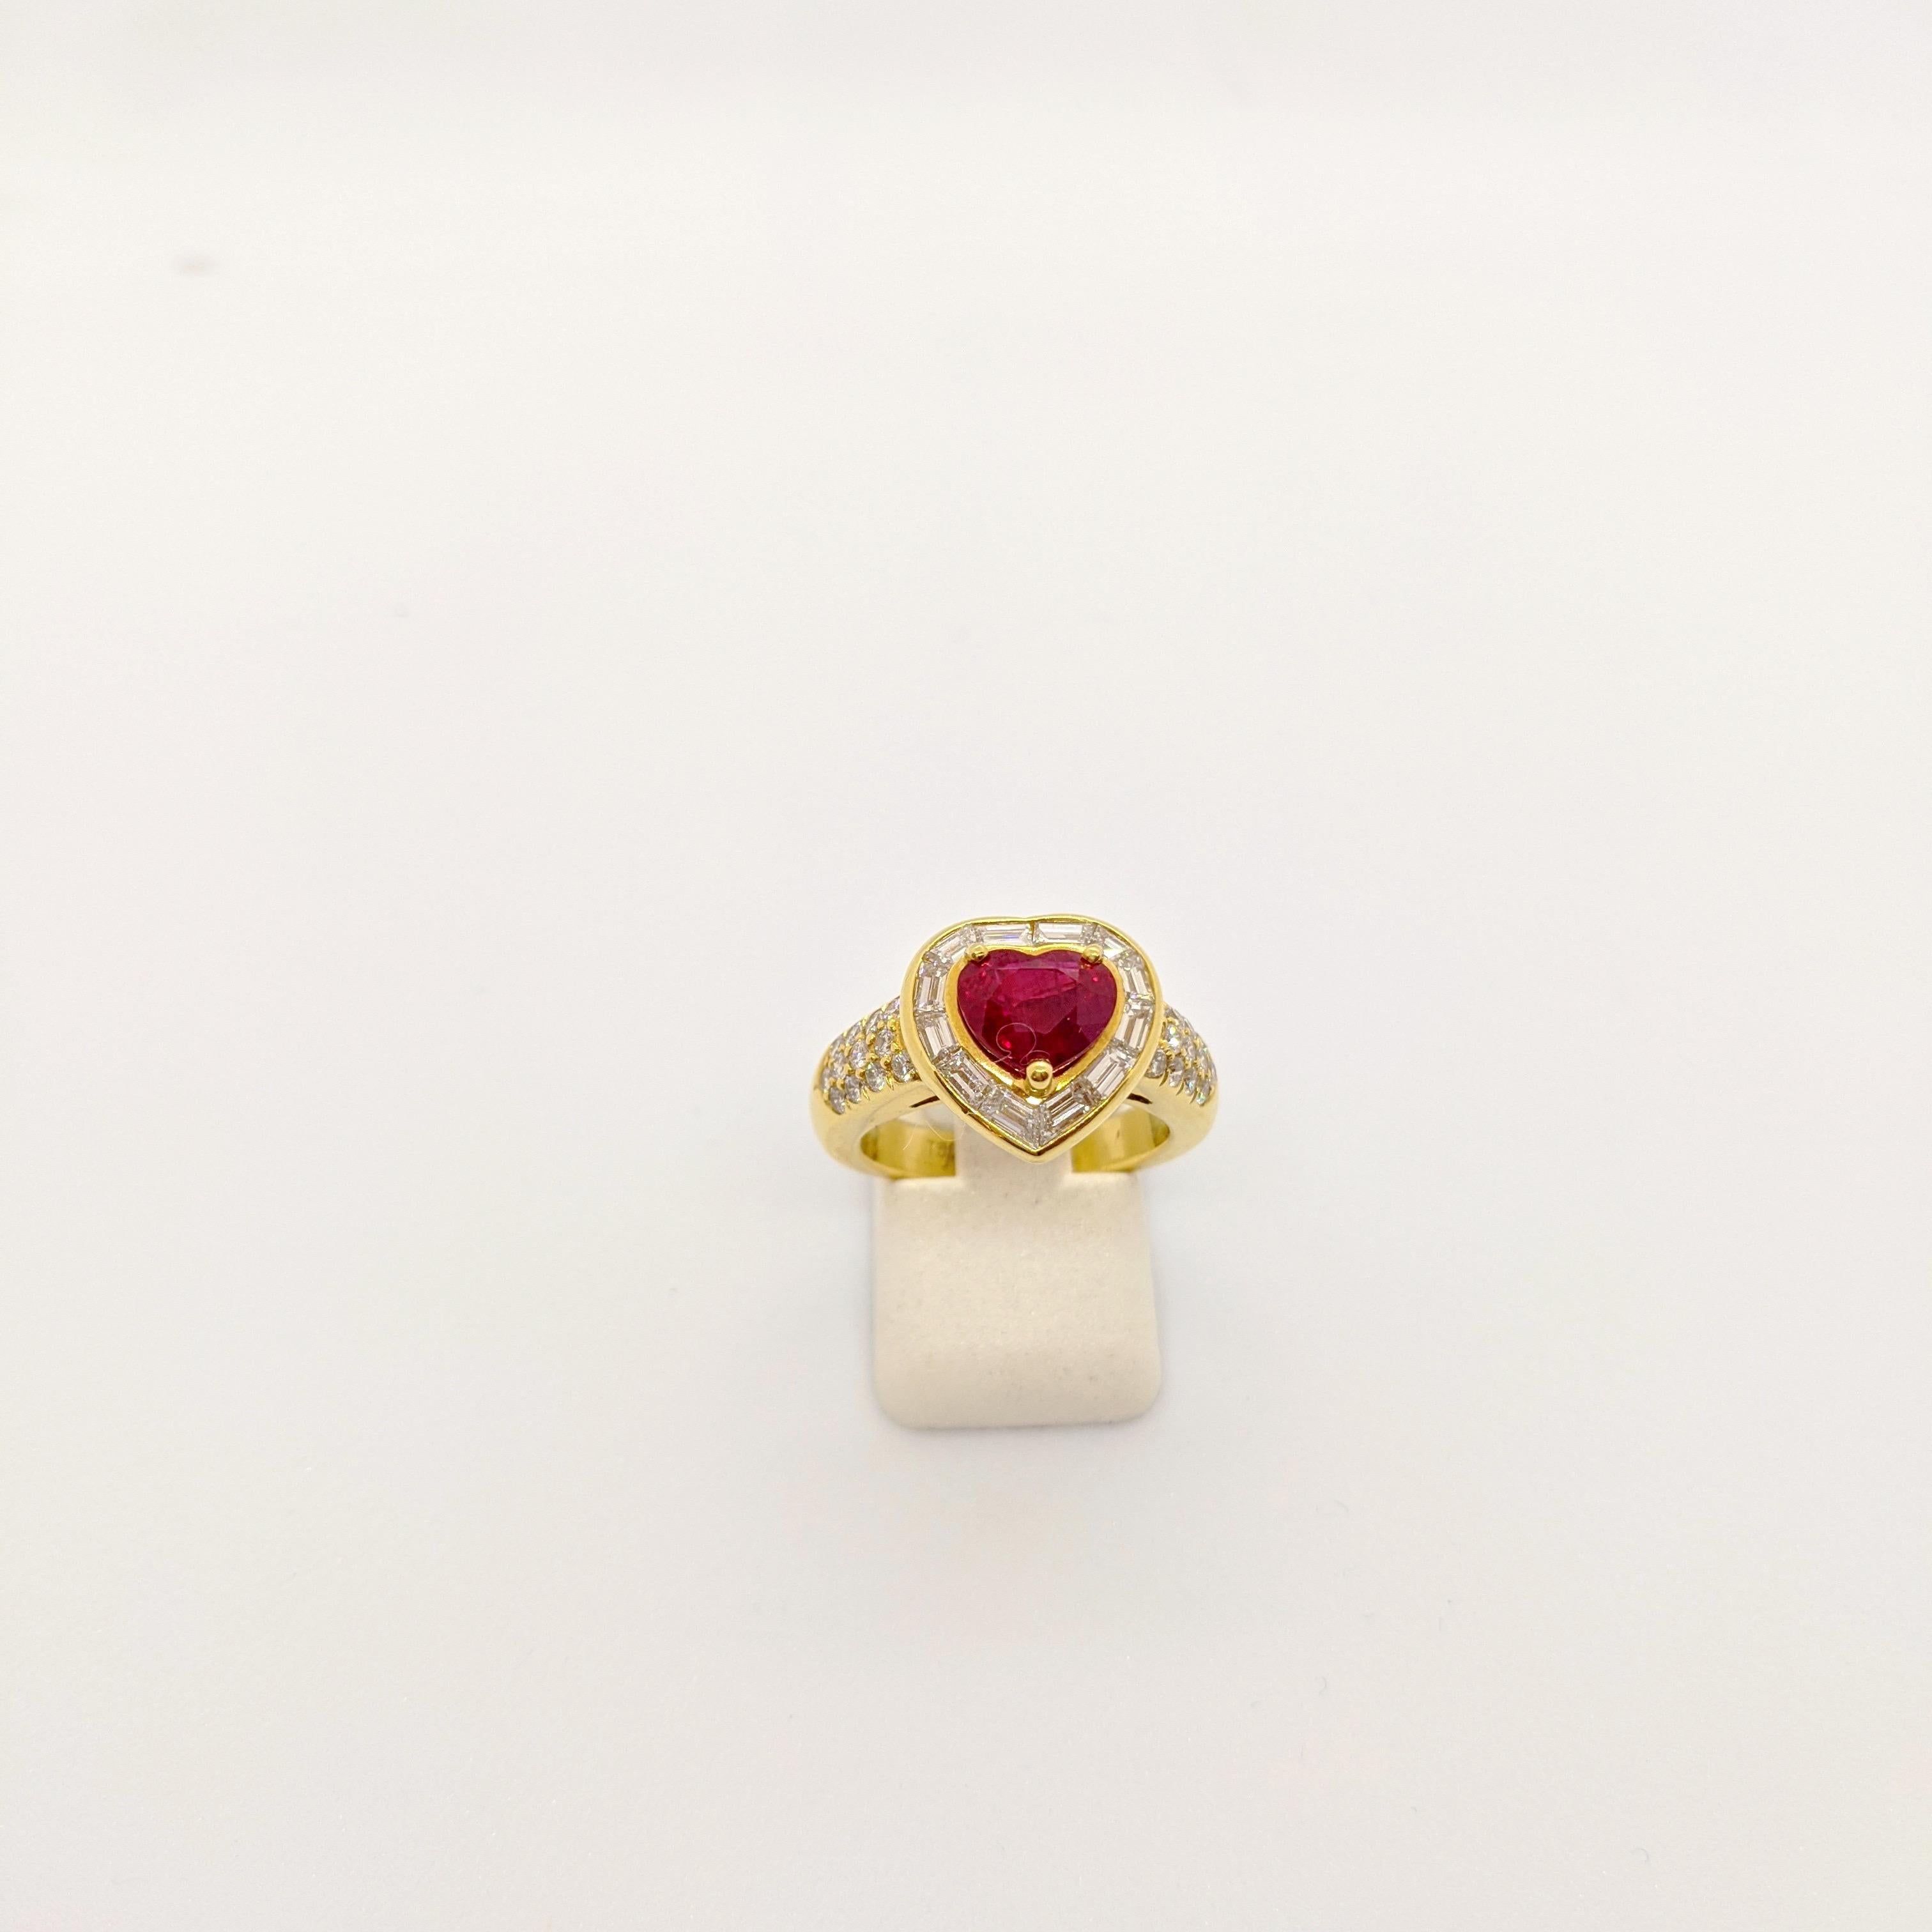 Cellini Jewelers NYC crafted this beautiful one of a kind ring which centers a 2.09 all natural Ruby heart, which is surrounded by .78 carats of baguette cut diamonds. The top of the shank is adorned with .39 Carats of round diamonds. 
Ring size